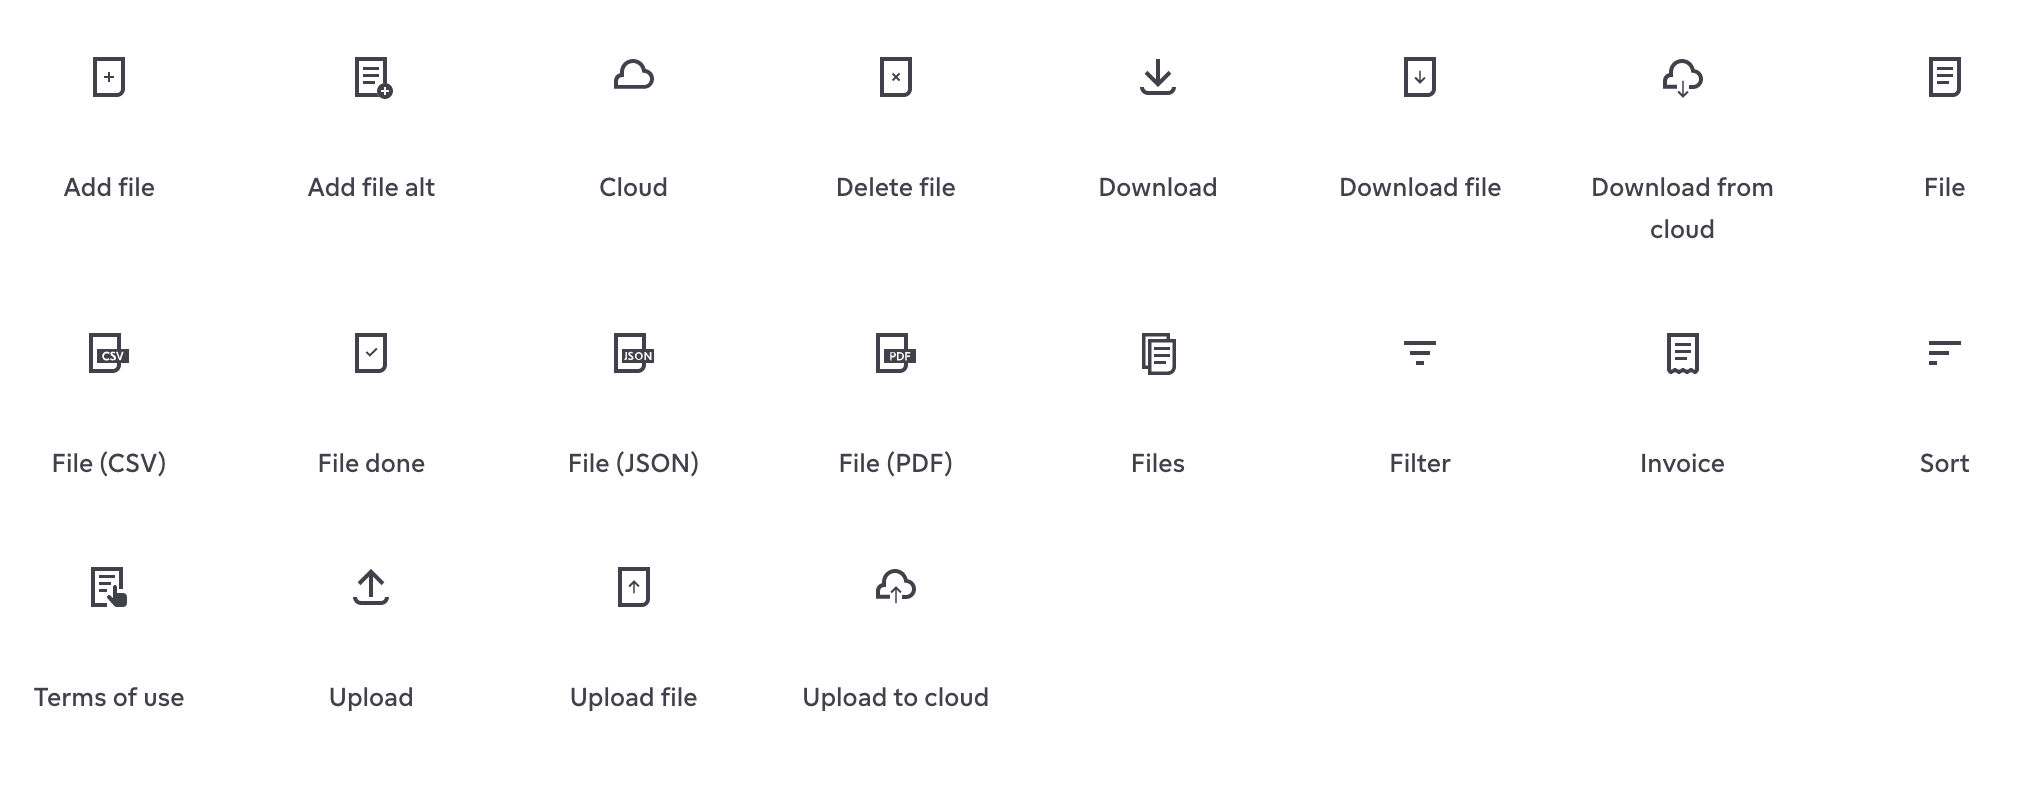 Some examples of Fortum’s system icons